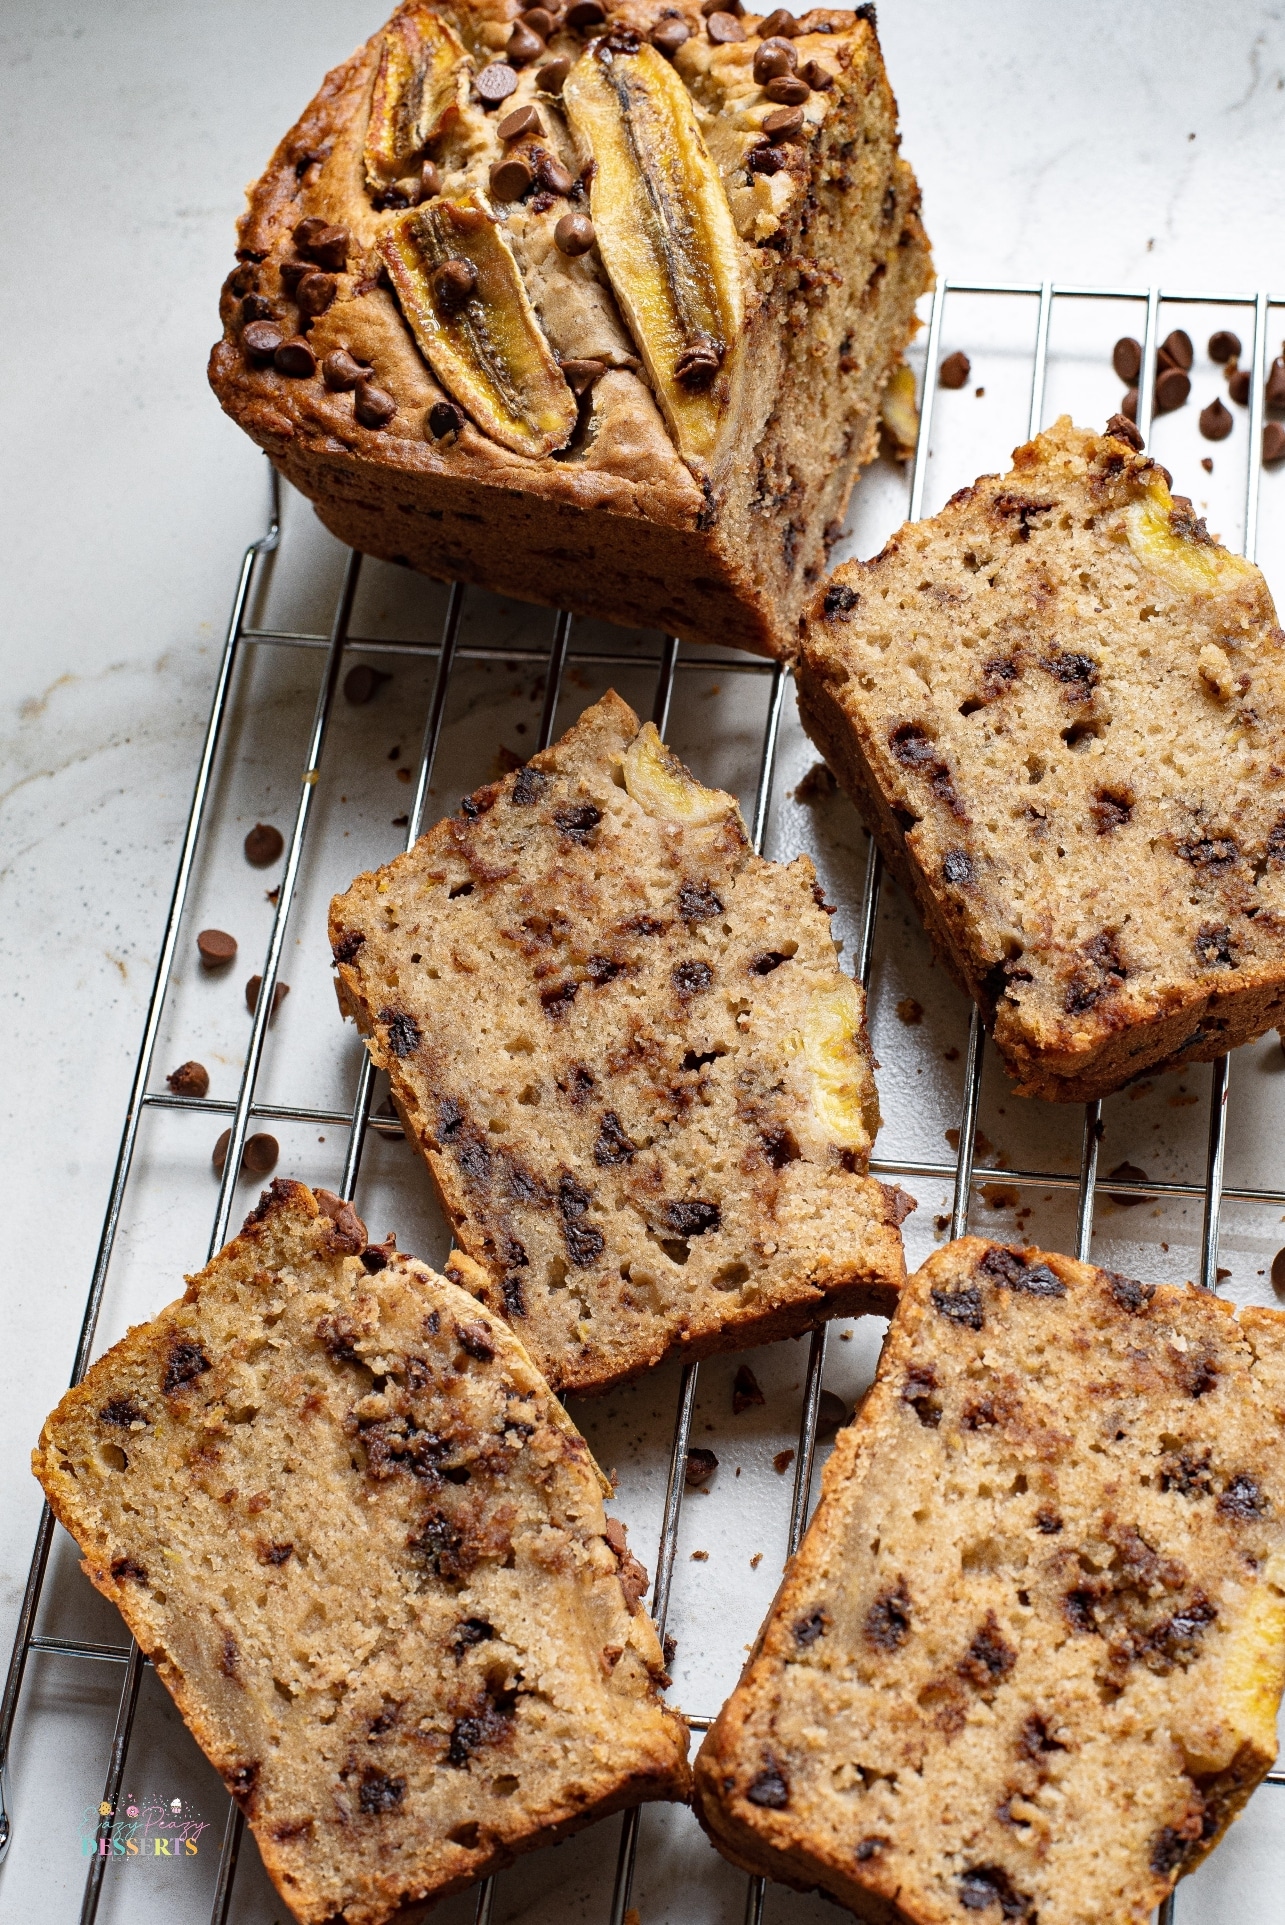 Banana bread recipe with chocolate chips